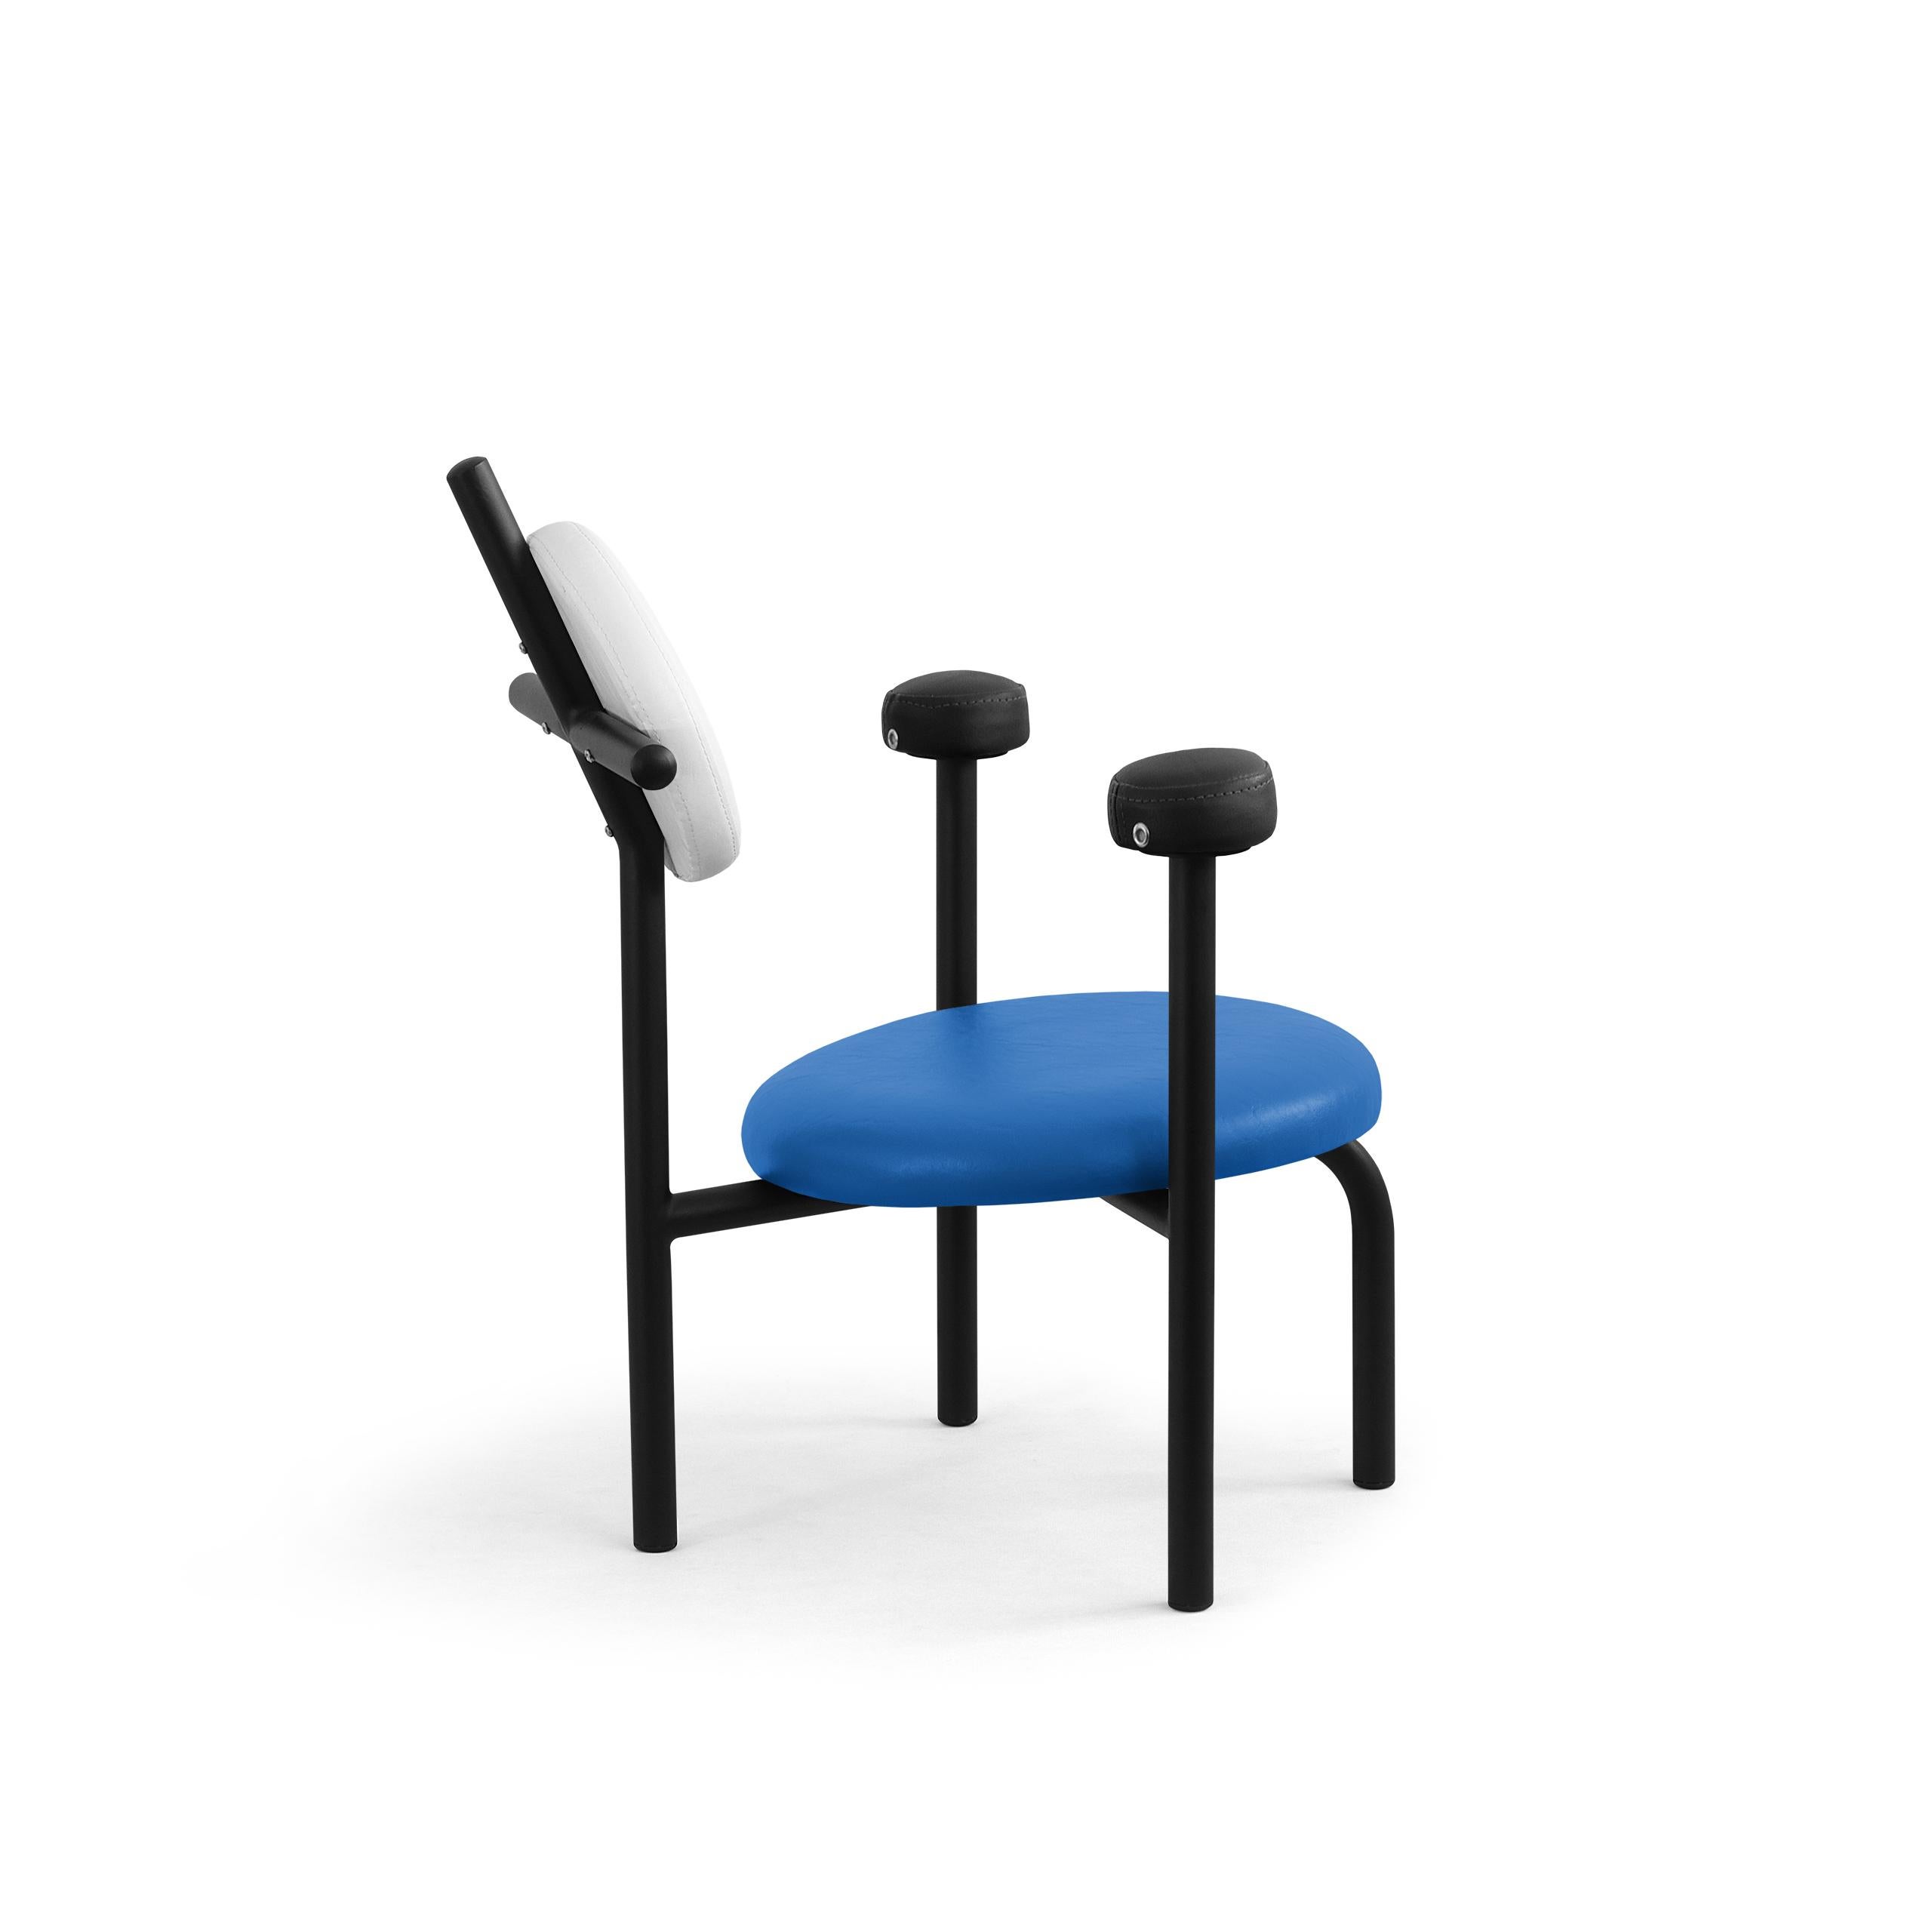 PK18 Impermeable Armchair, Blue Seat & Black Metal Structure by Paulo Kobylka In New Condition For Sale In Londrina, Paraná